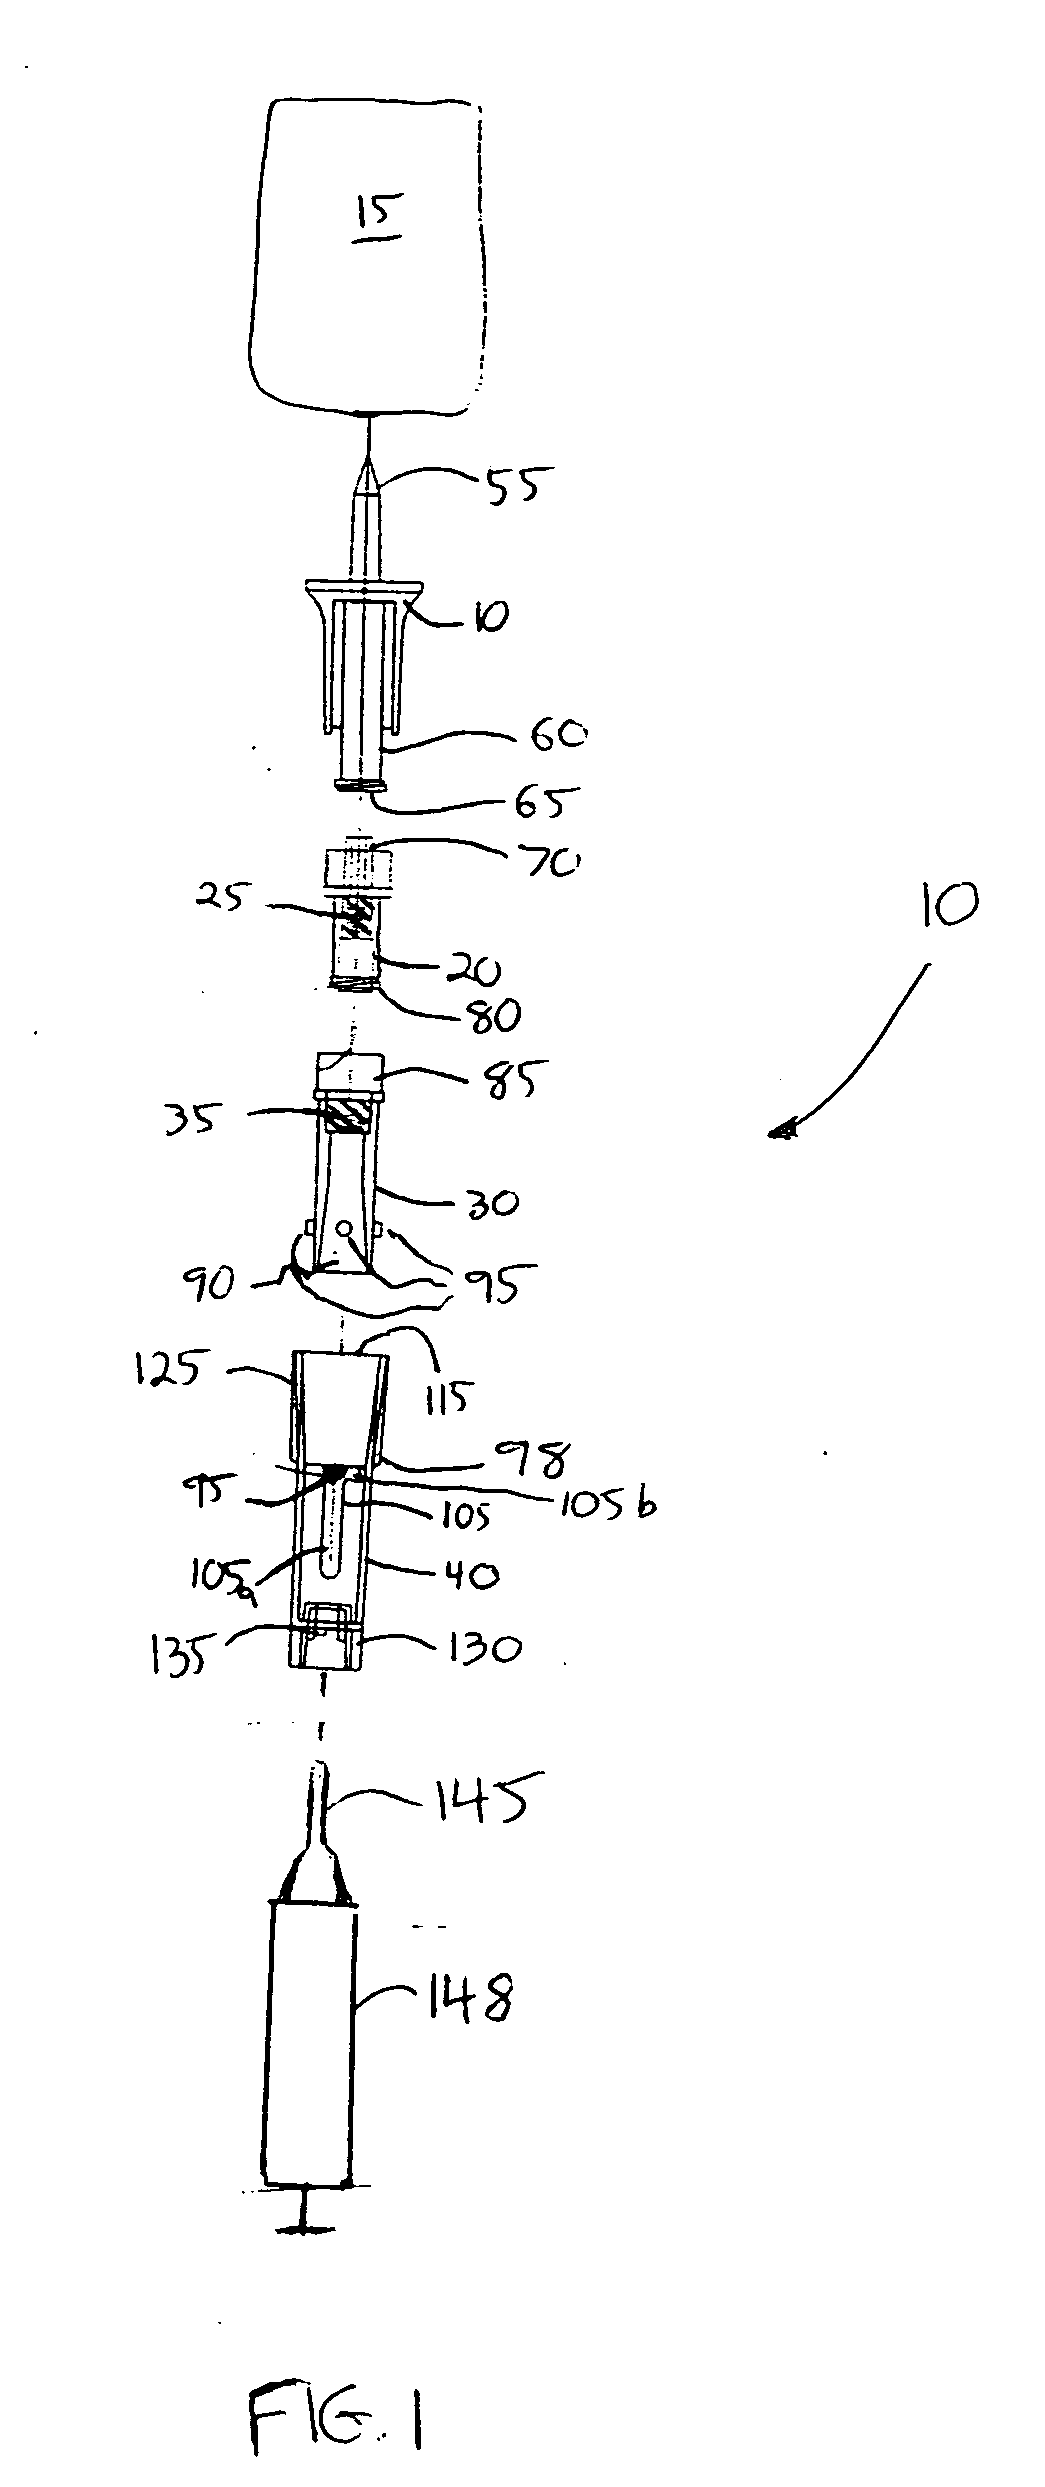 System and method for infusing toxins using safety set, connect set and cyto admin set